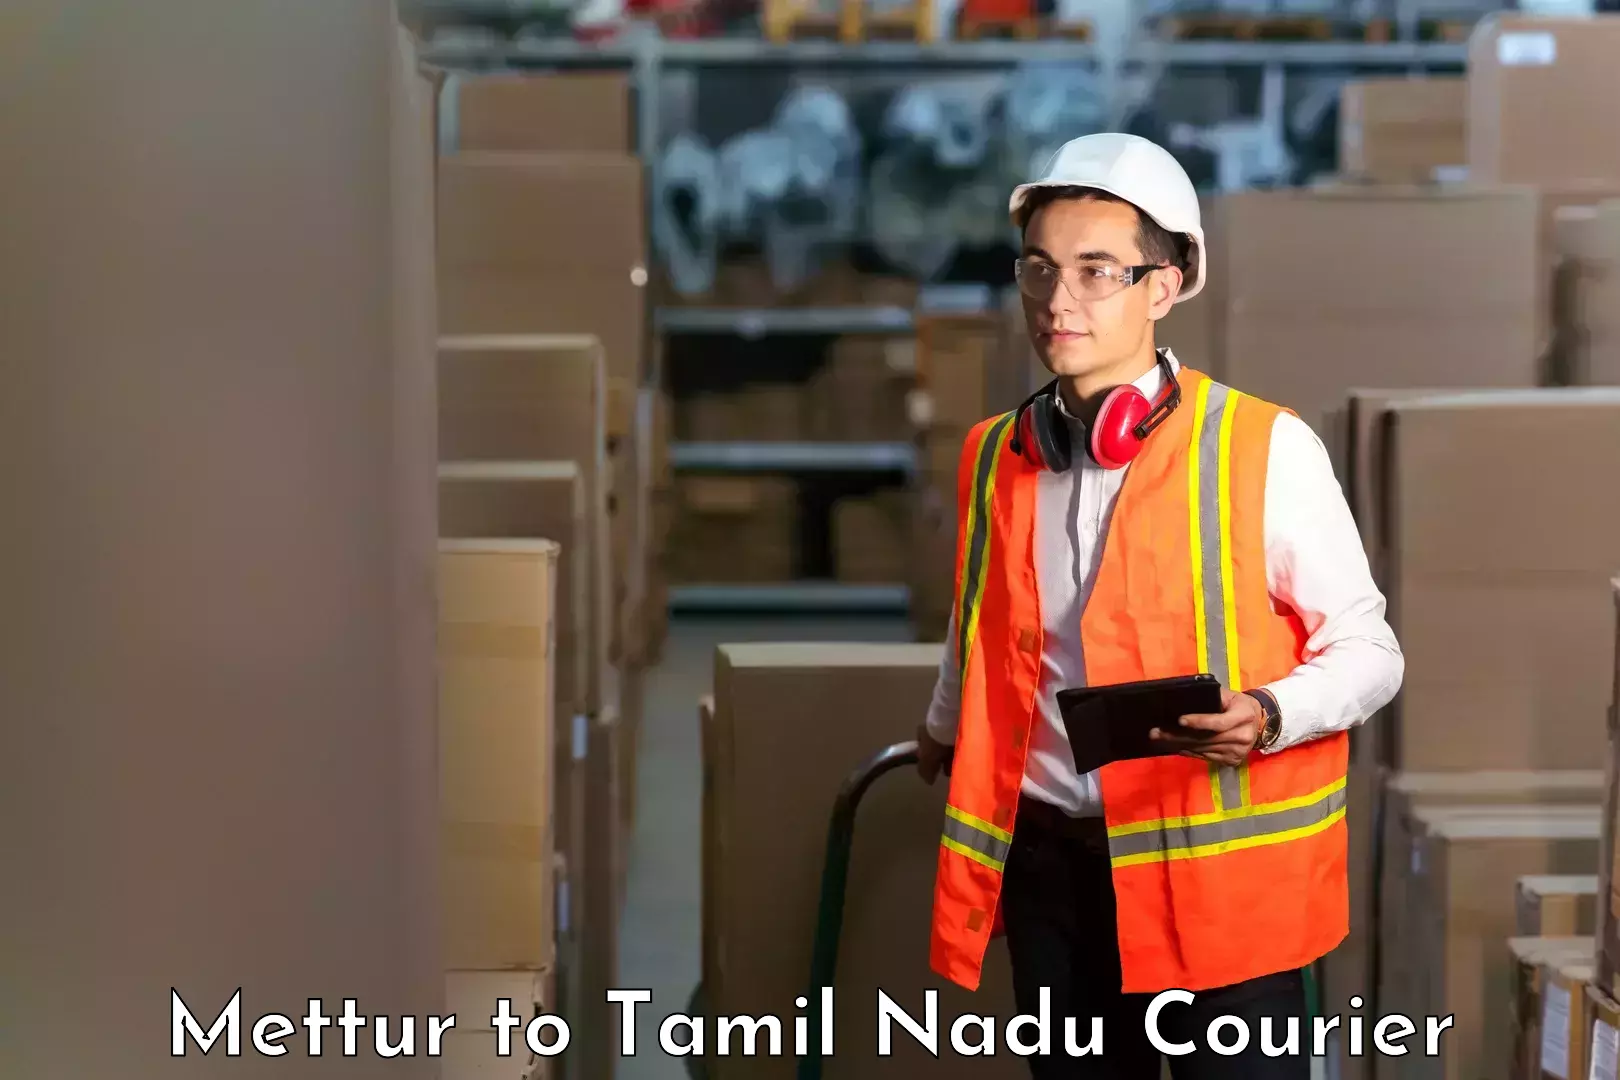 Reliable delivery network Mettur to Namakkal